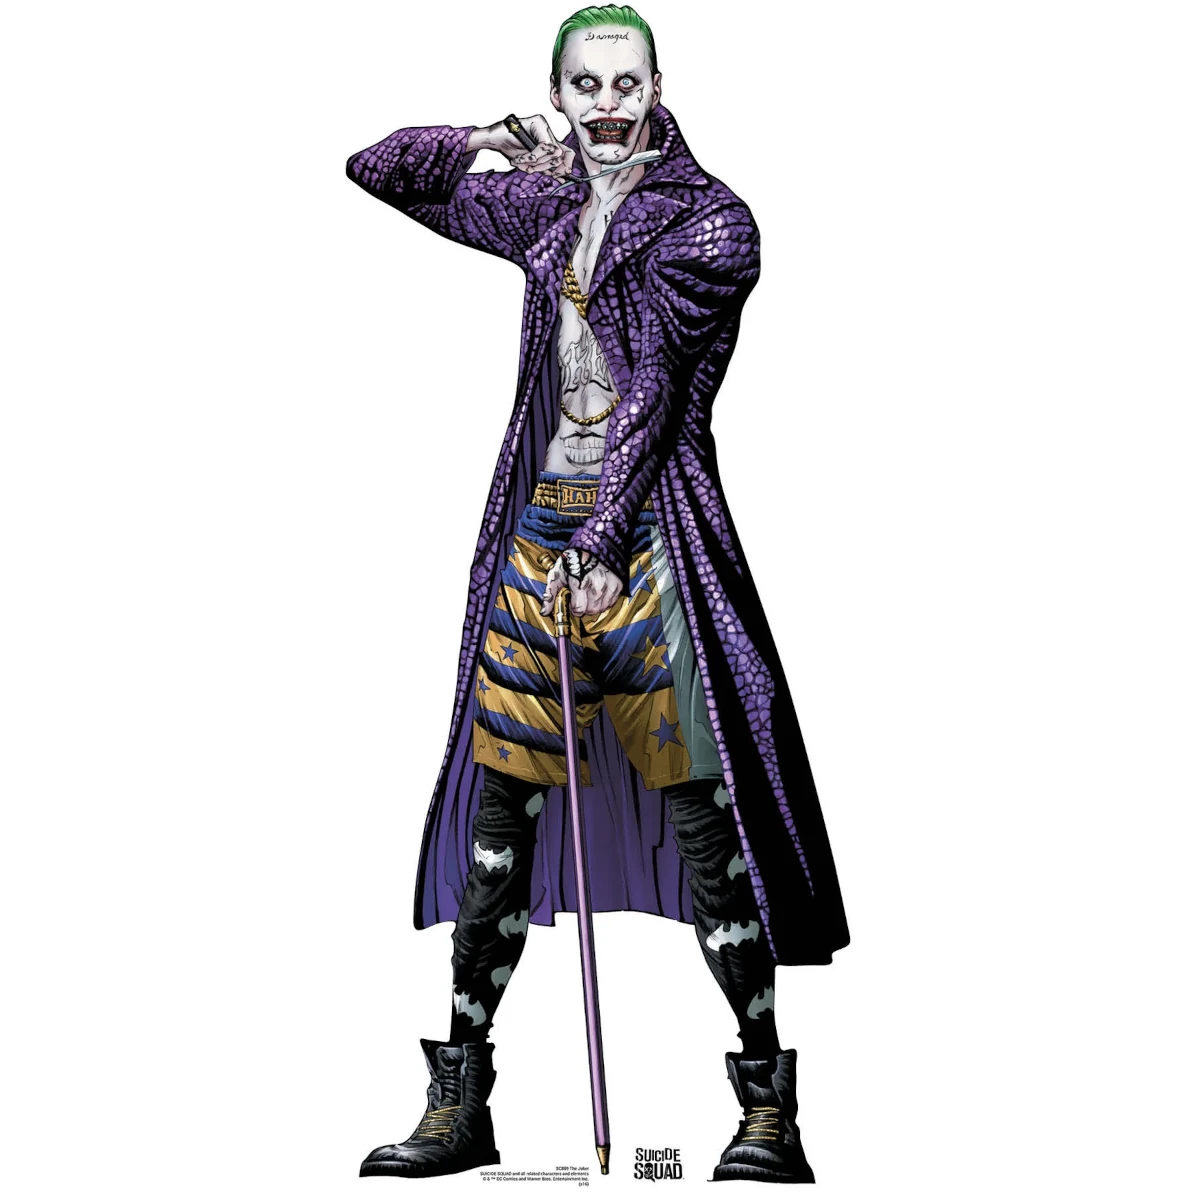 SC889 The Joker 'Comic Art' (Suicide Squad) Official Lifesize Cardboard Cutout Standee Front